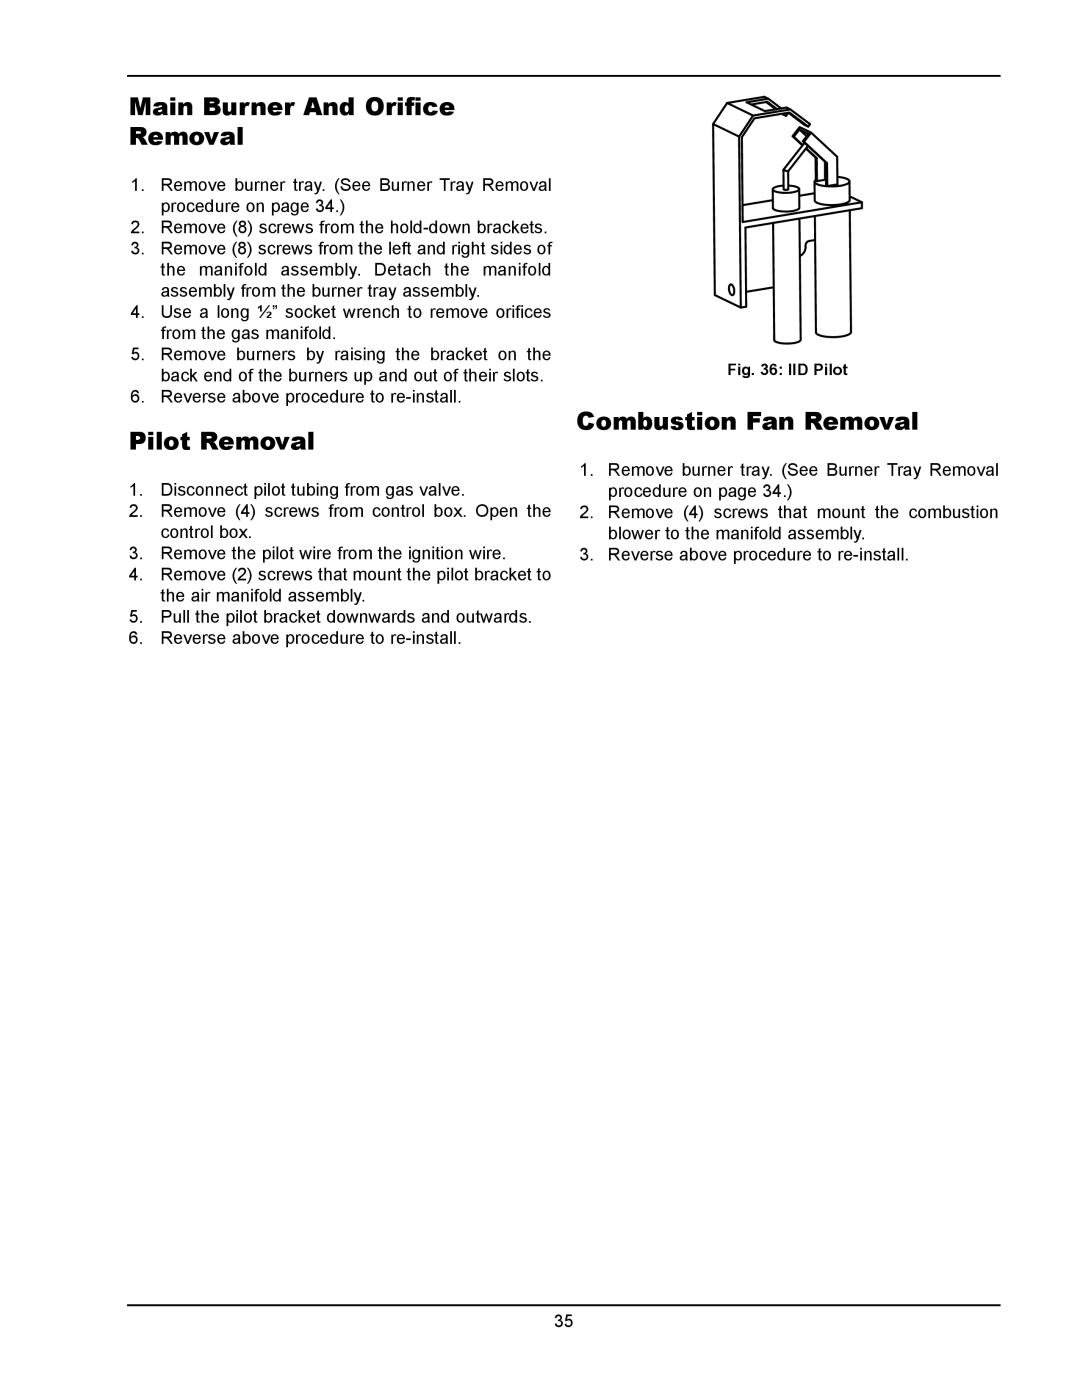 Raypak 1334001 operating instructions Main burner And Orifice Removal, Pilot Removal, Combustion Fan Removal 